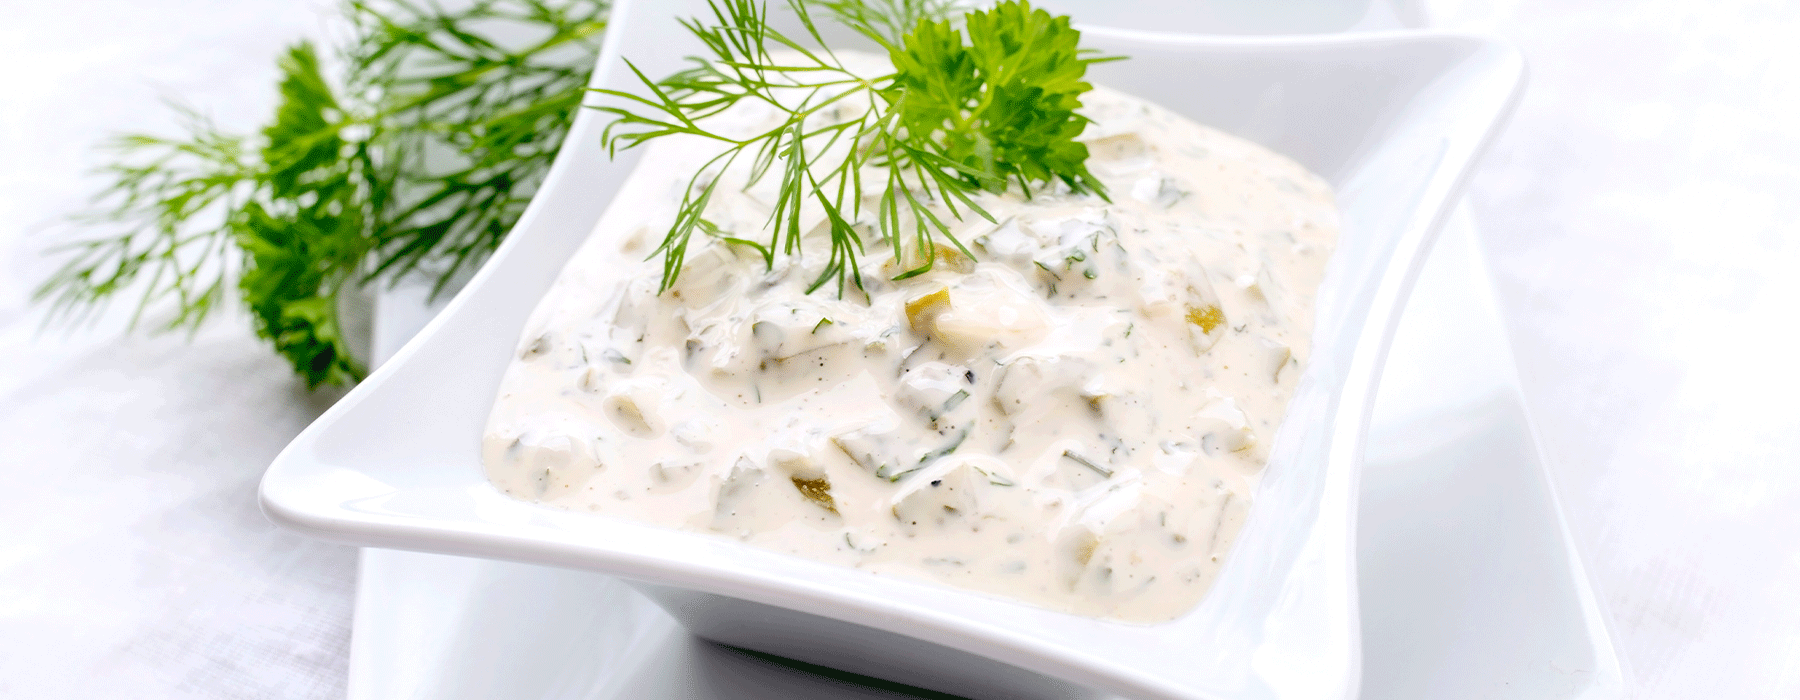 Dill and Pickle Dipping Sauce